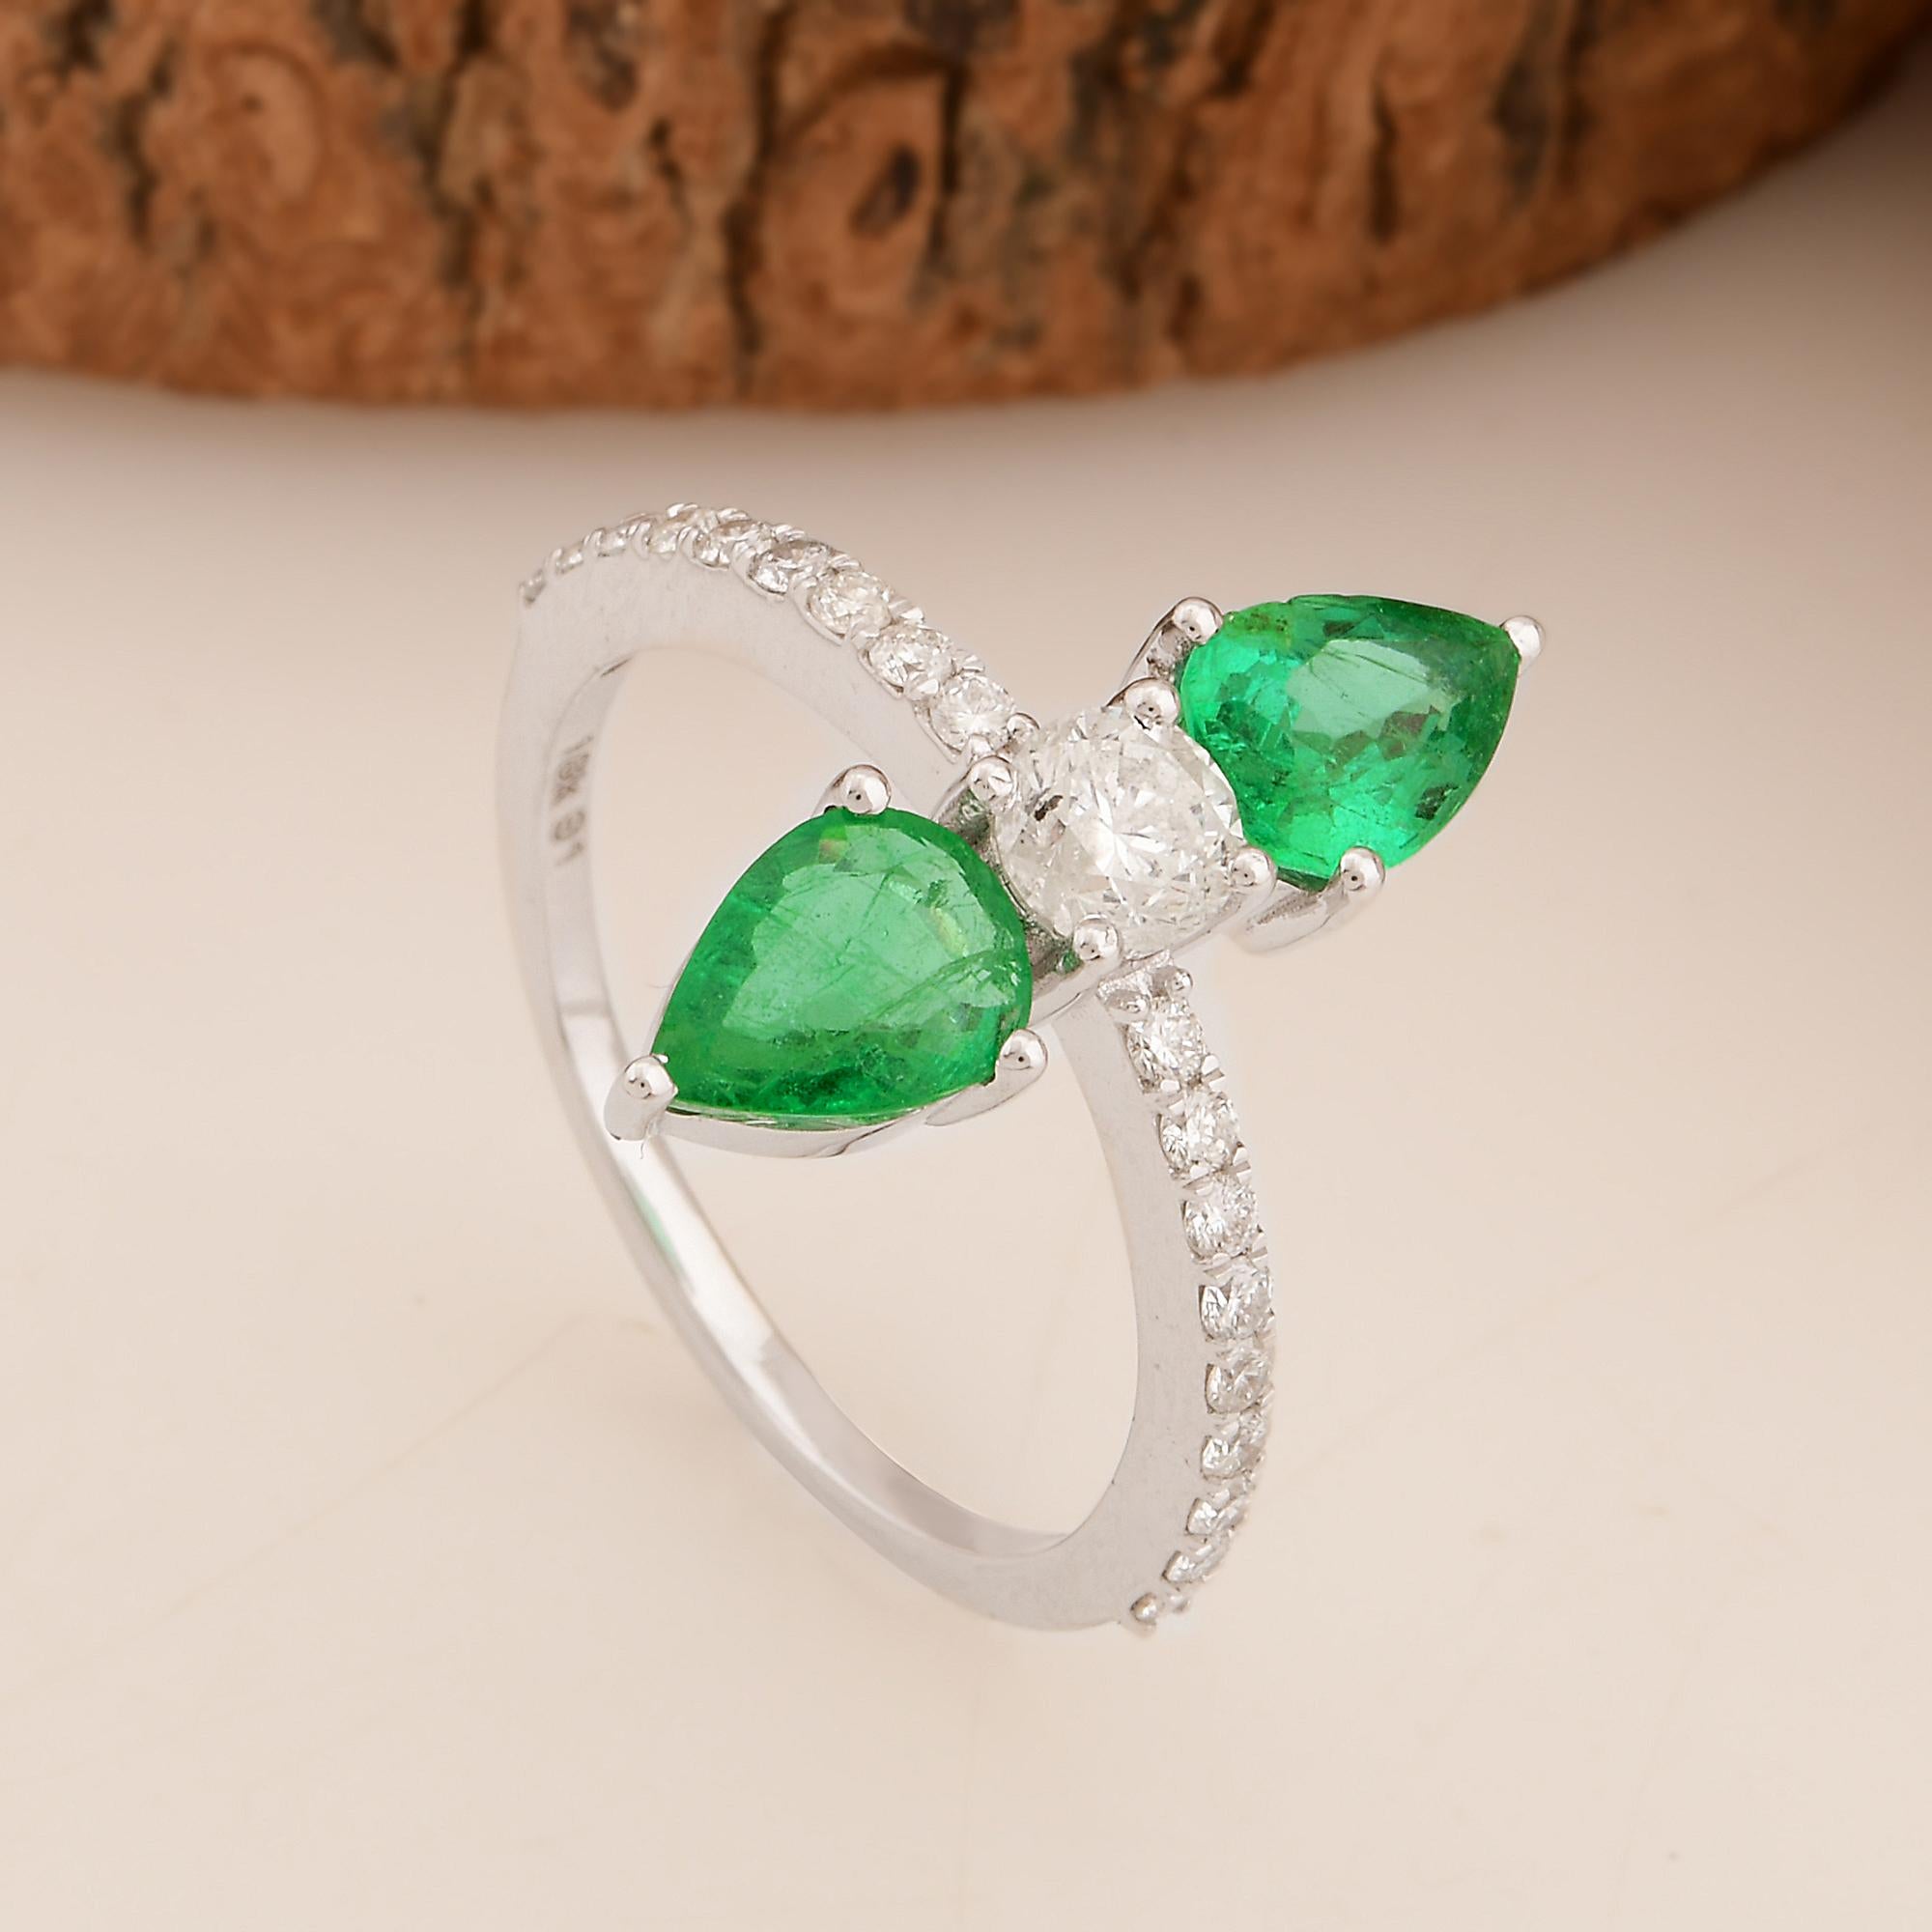 For Sale:  Pear Natural Emerald Gemstone Band Ring Diamond Solid 18k White Gold Jewelry 4